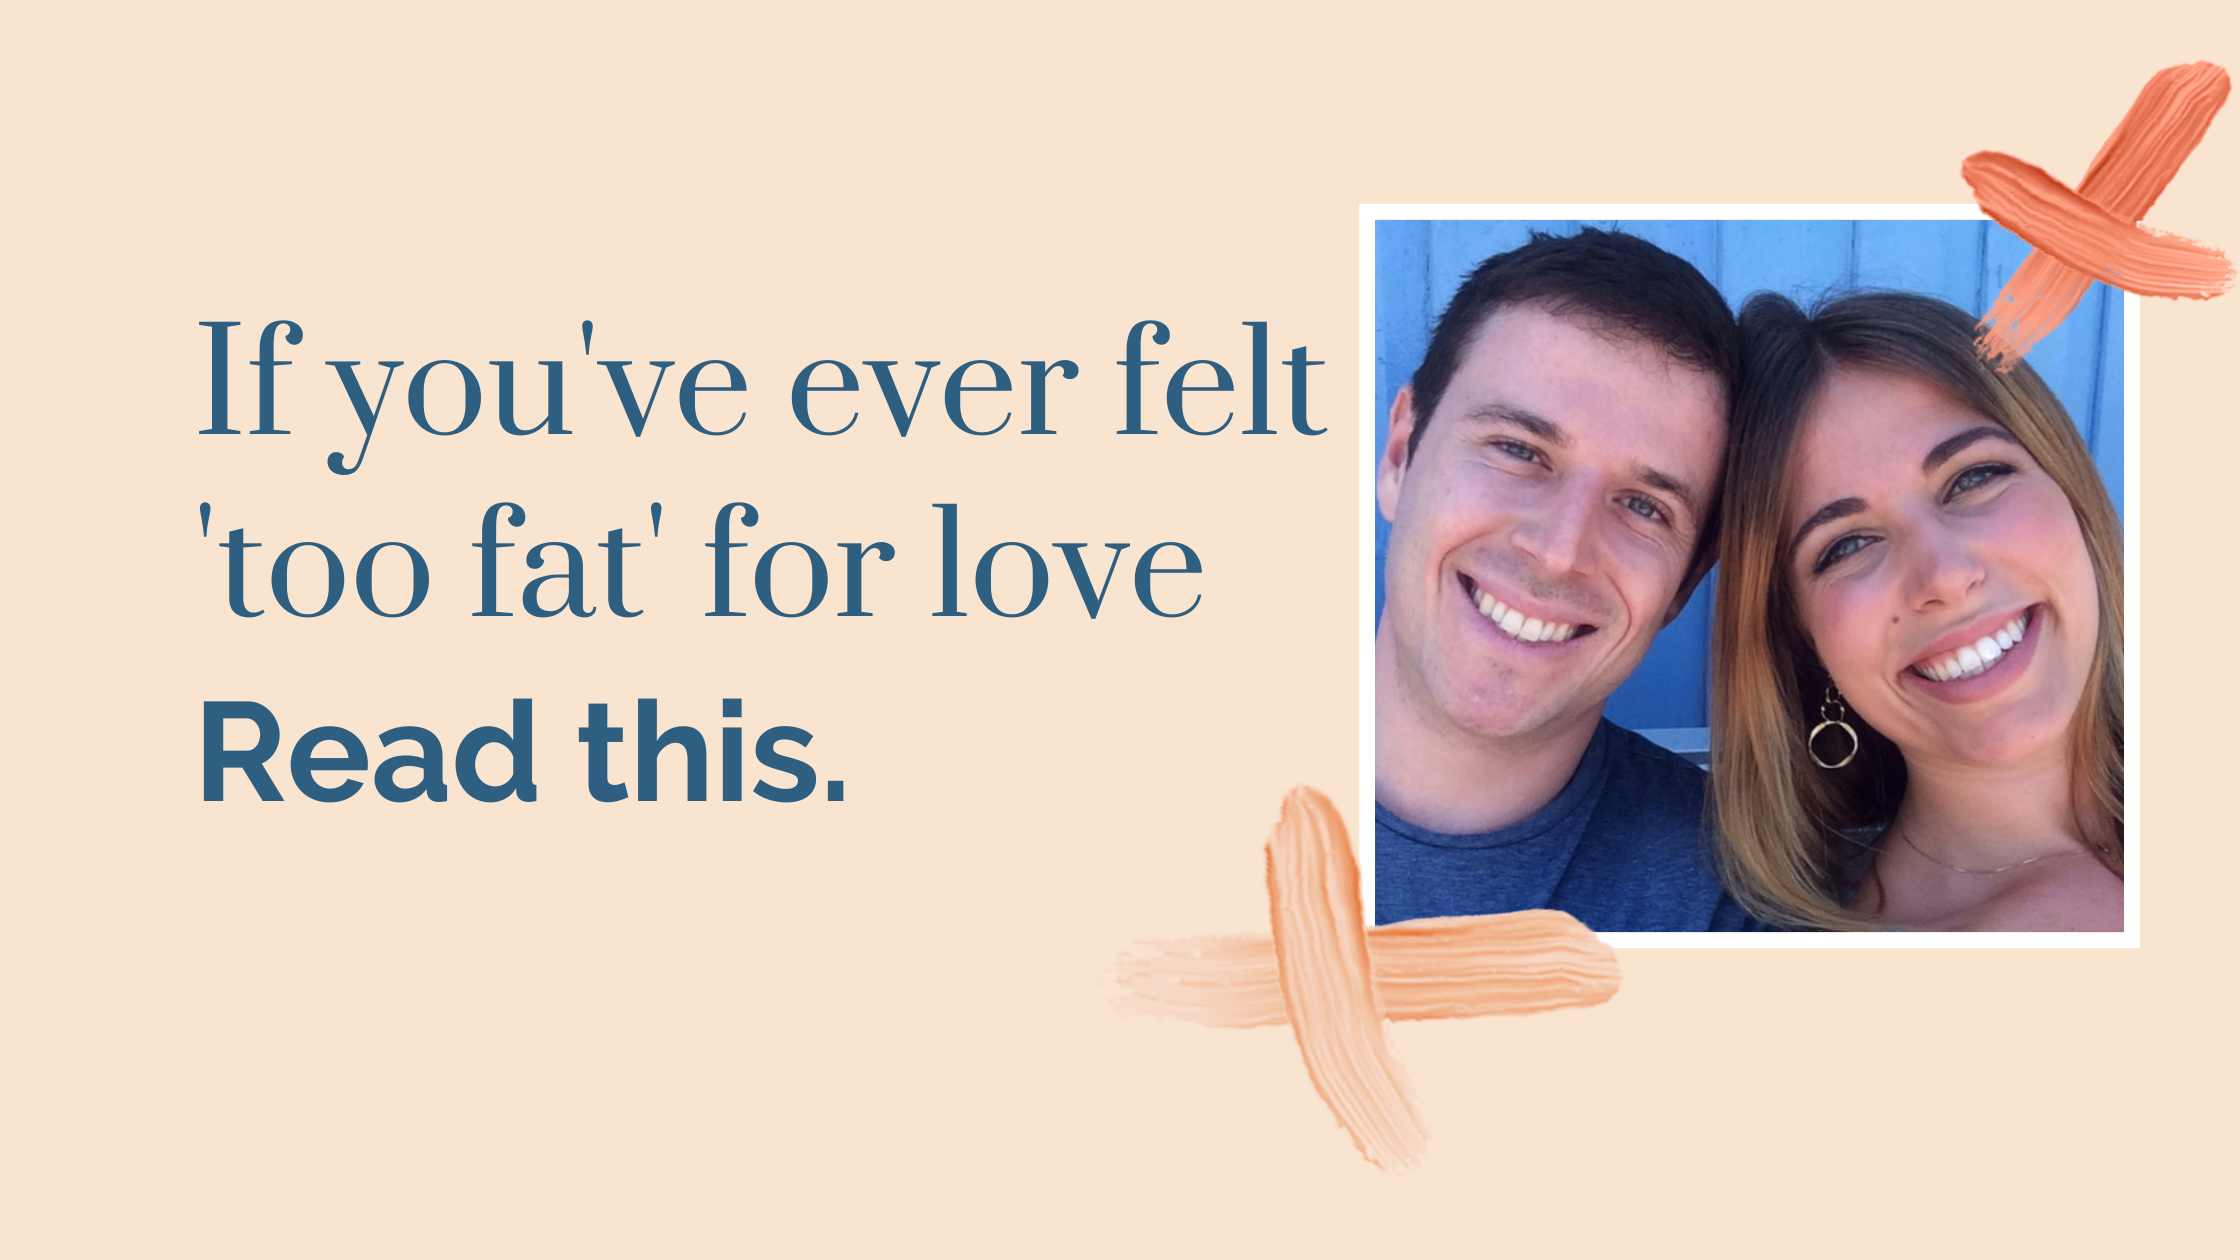 I met Les when I was at my heaviest weight. Image: Lyndi Cohen